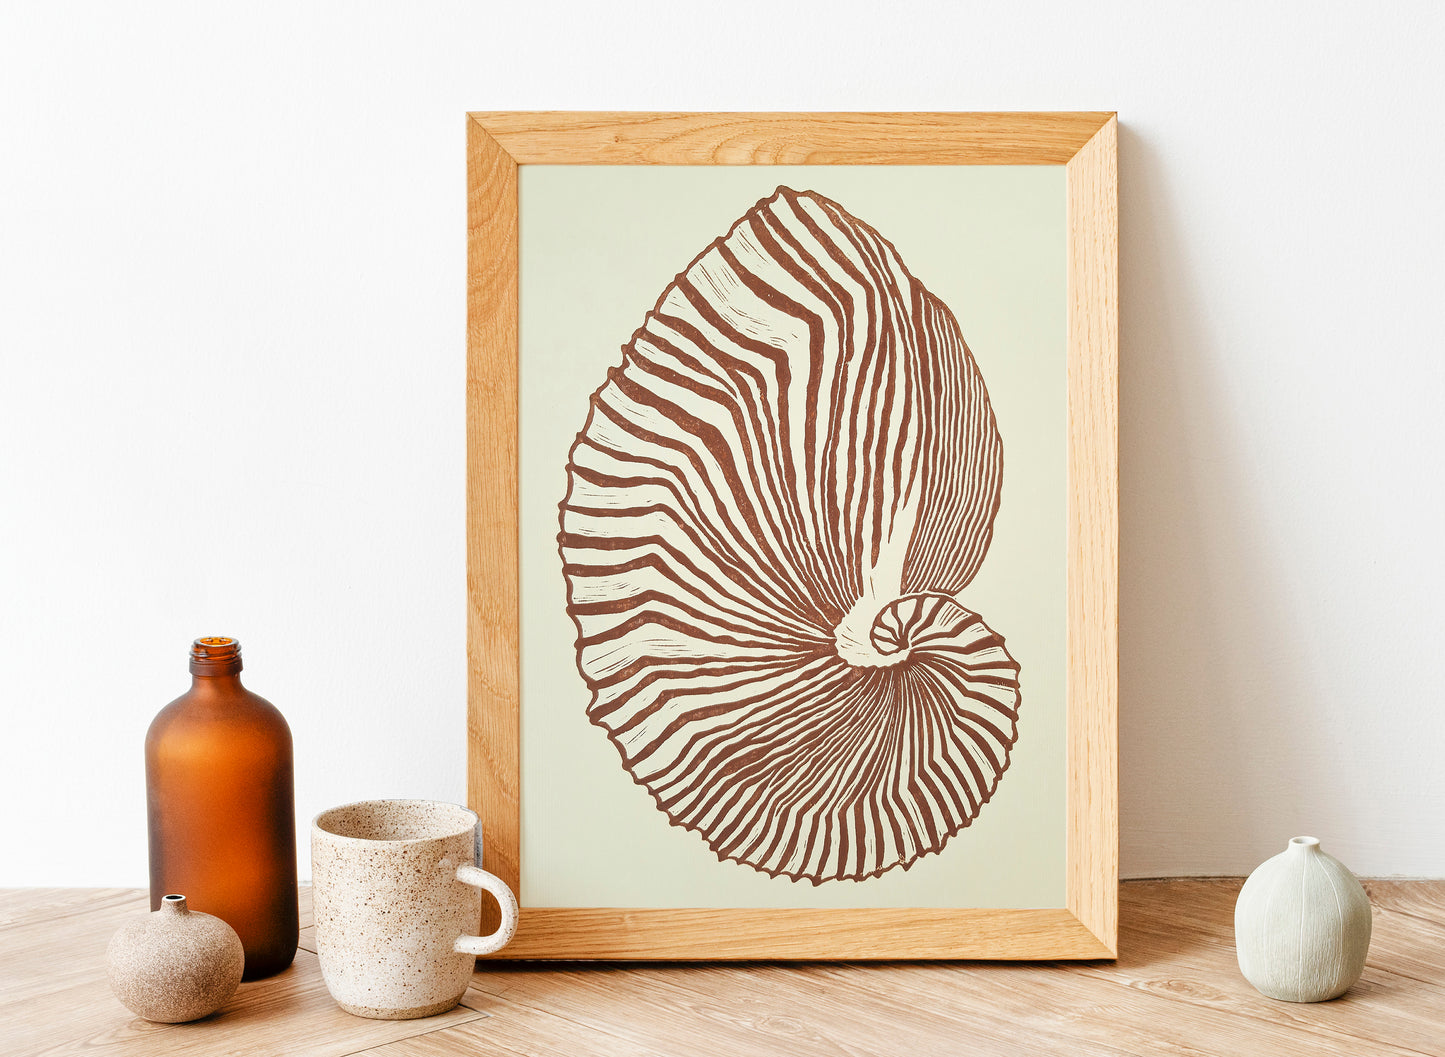 Beige and brown sea shell art Linocut print art for Bedroom or bathroom wall decor UNFRAMED / living room wall adecor for New home gift, houswarming gift, nature lover gift, Nautical wall decor, Simple artwork, Hampton style decor, Coastal wall art